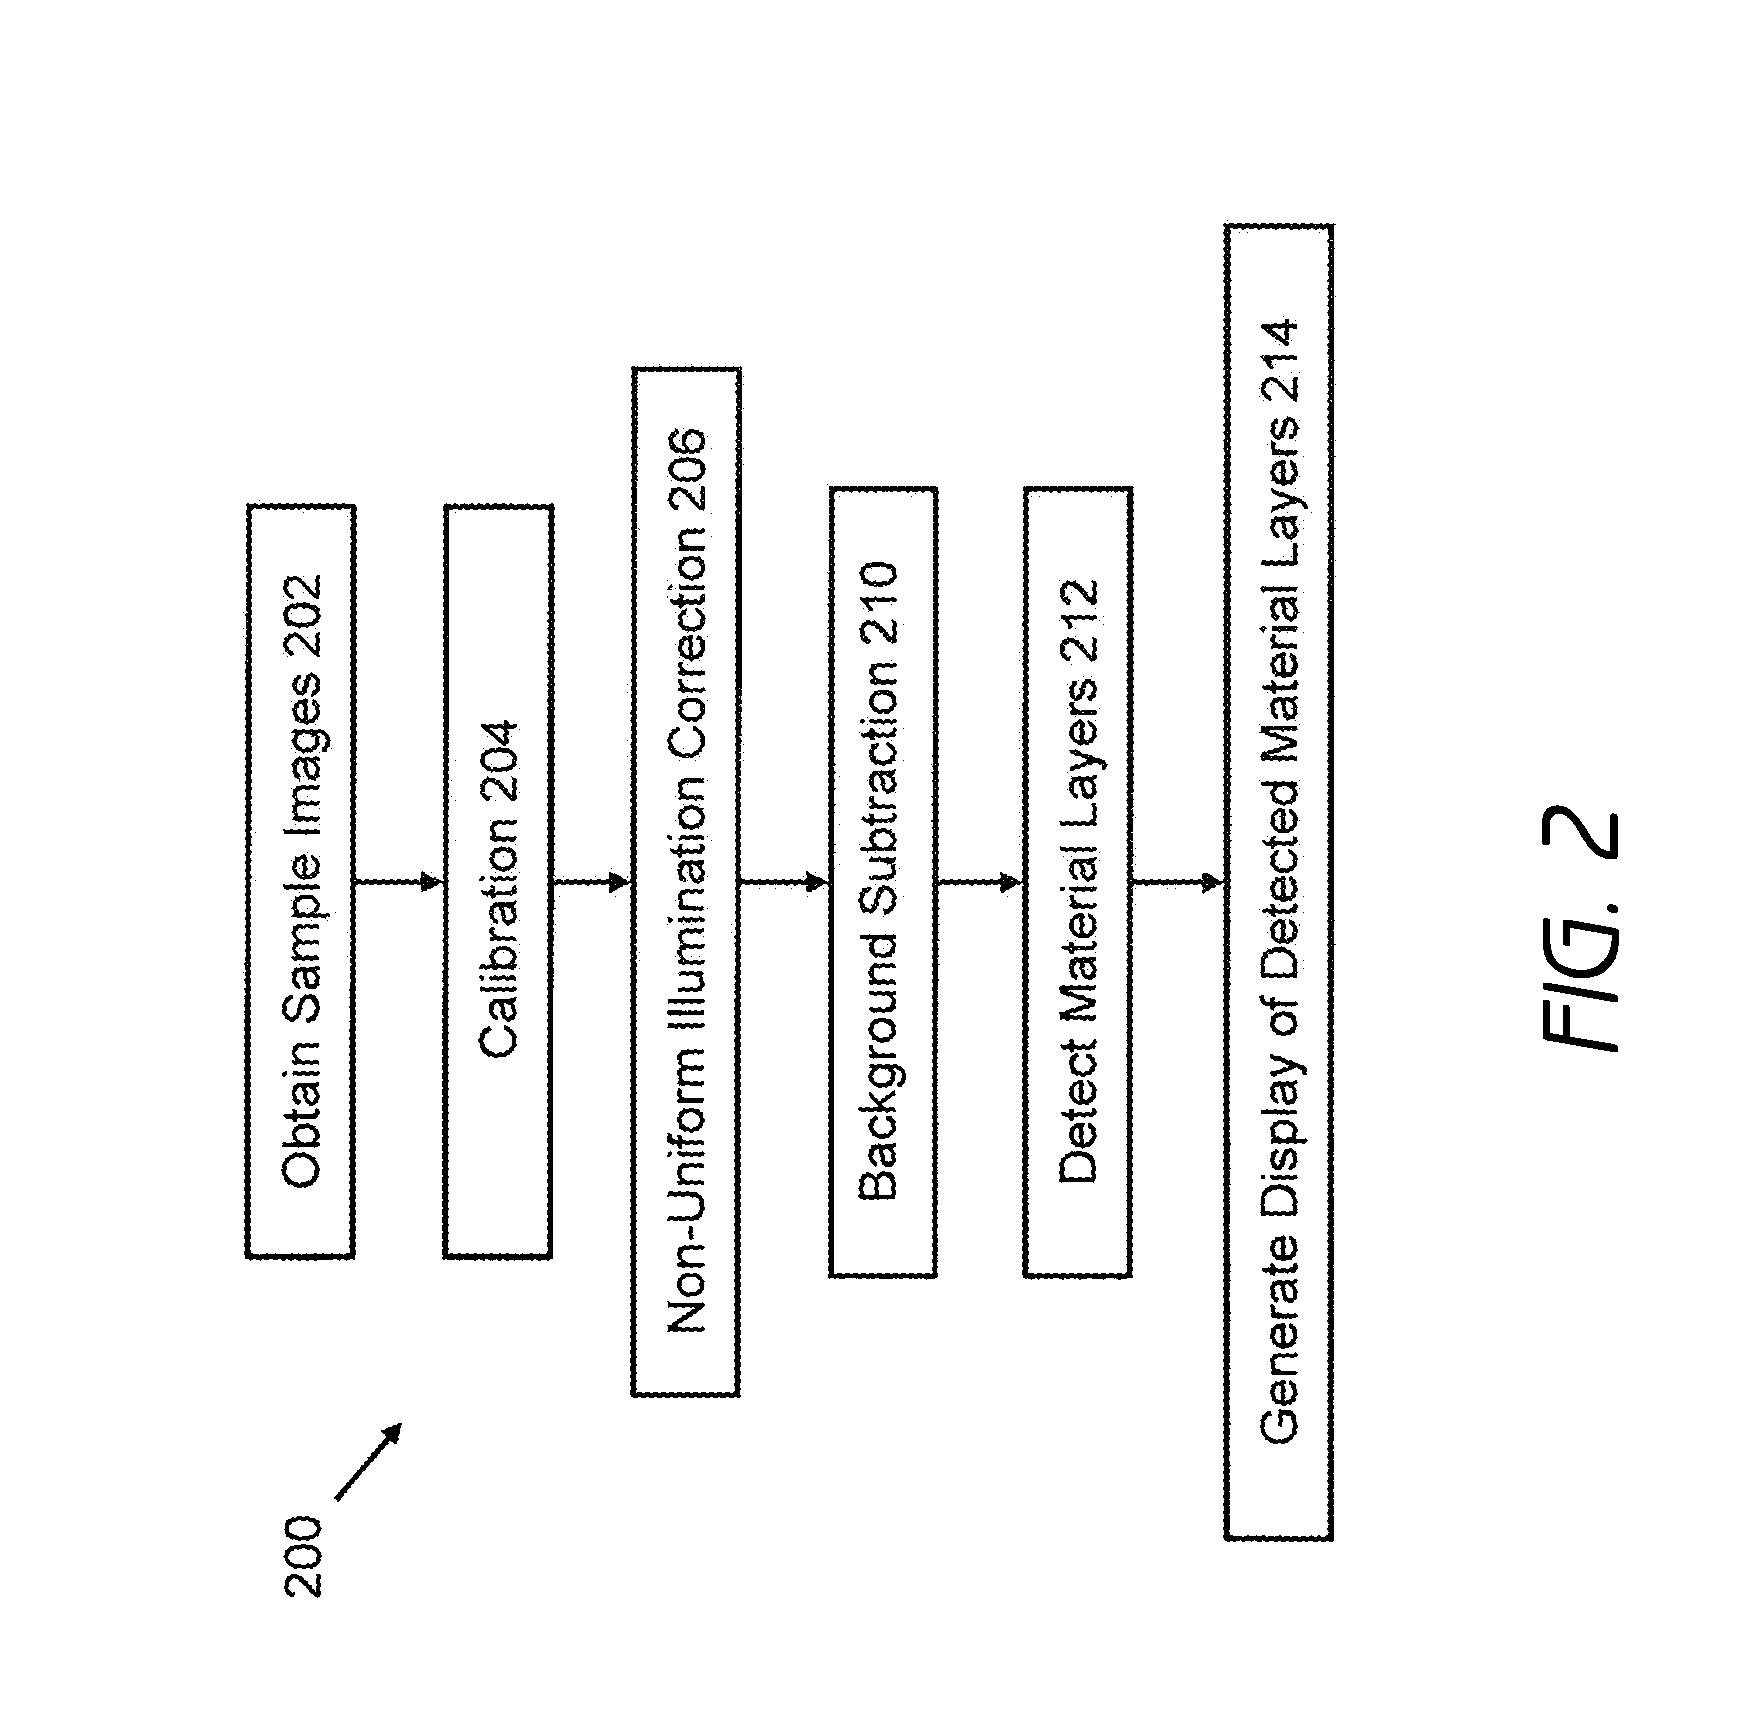 Systems and methods for material layer identification through image processing